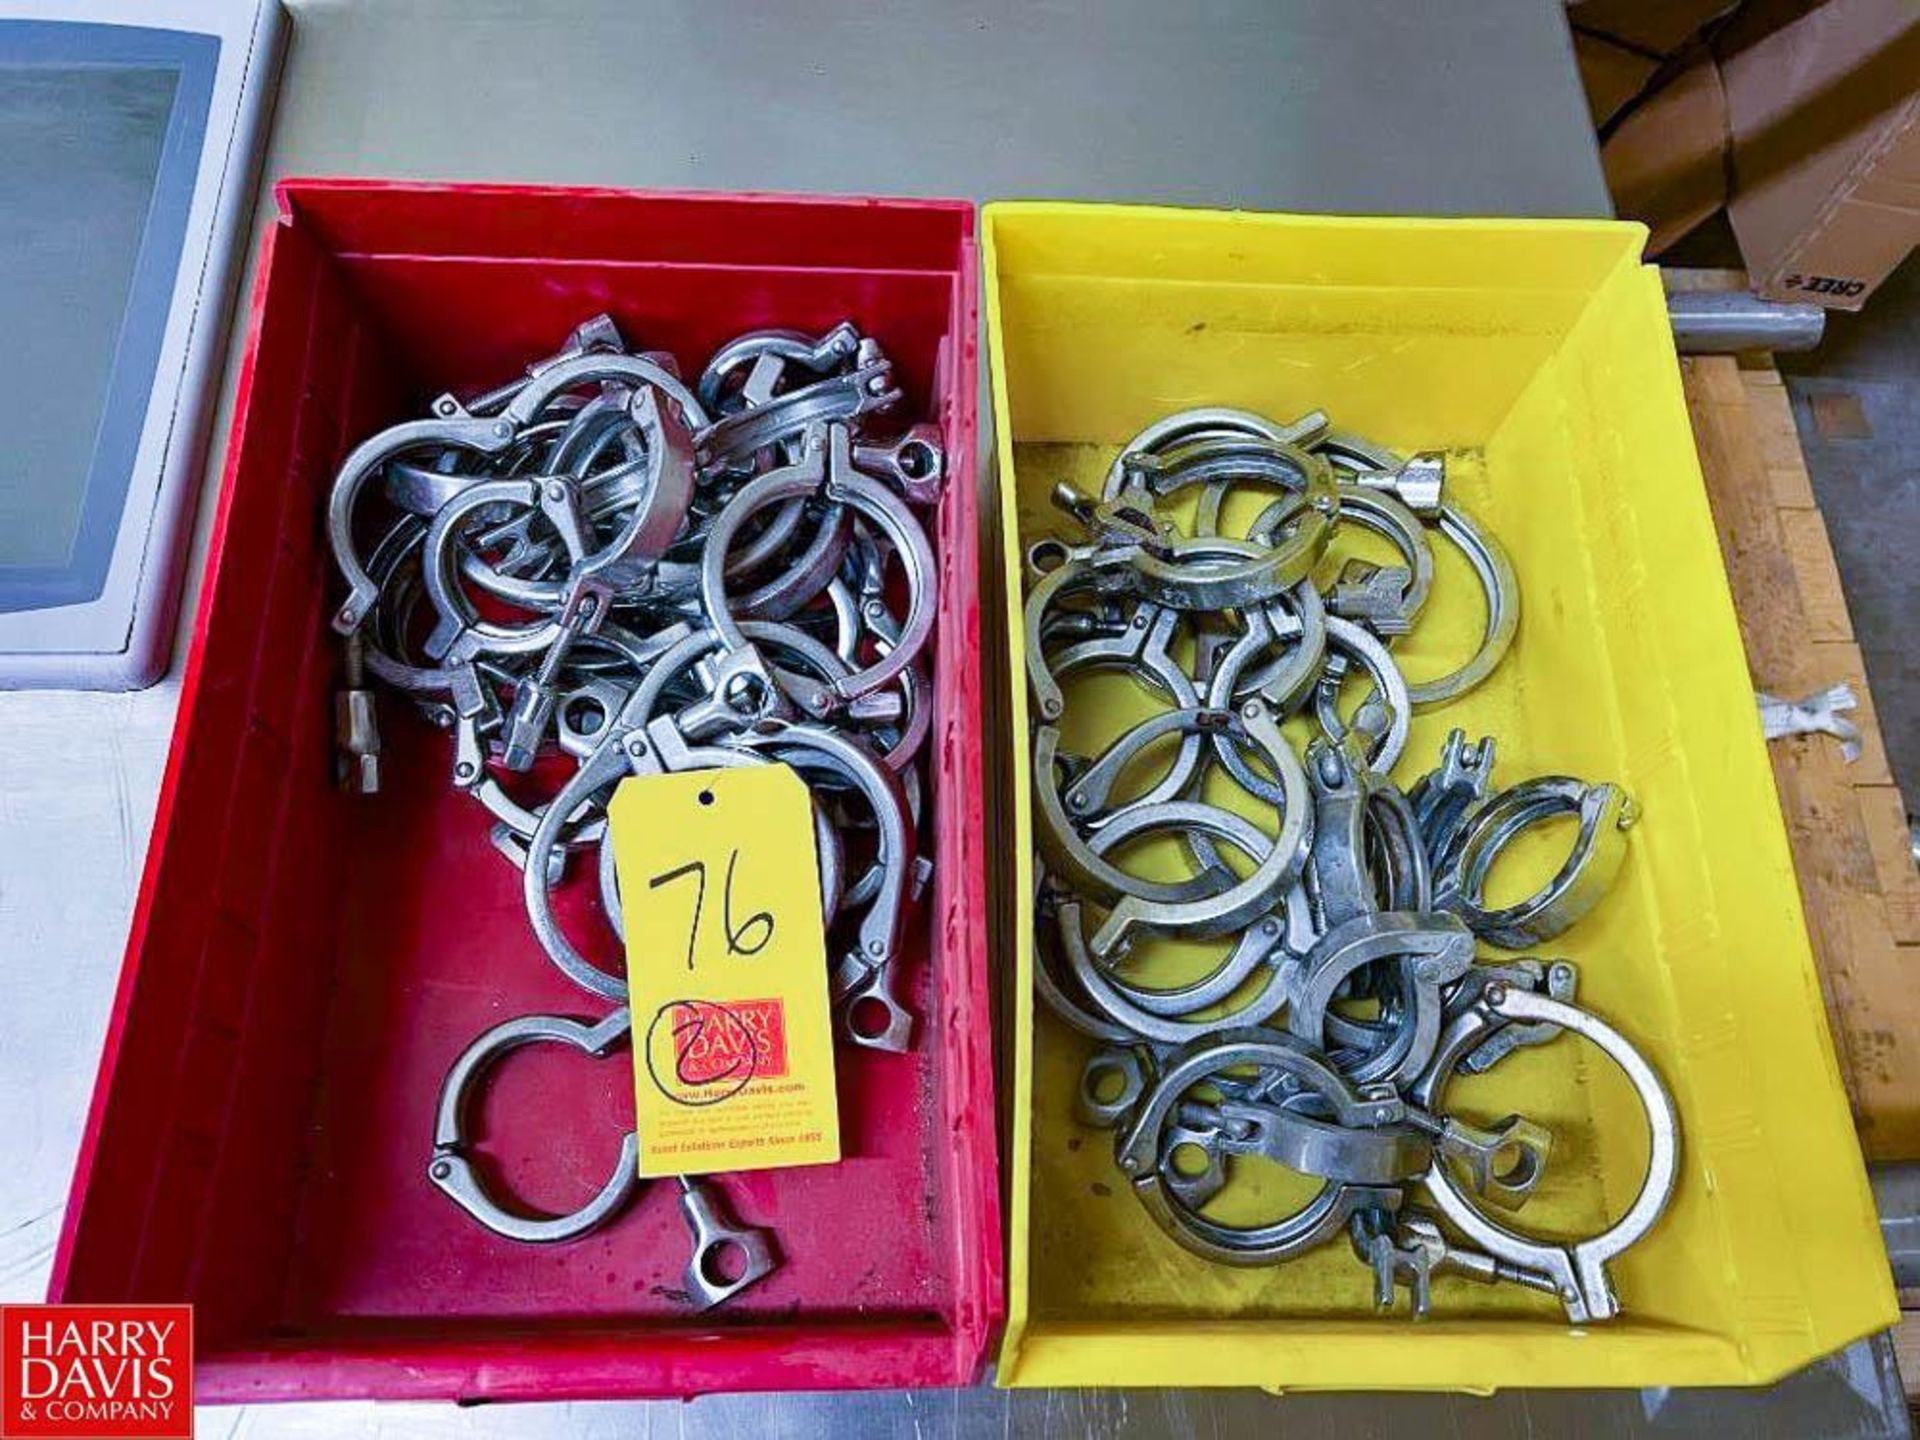 (25) Assorted S/S Clamps Up to 3" (Location: Neosho, MO) - Rigging: $50